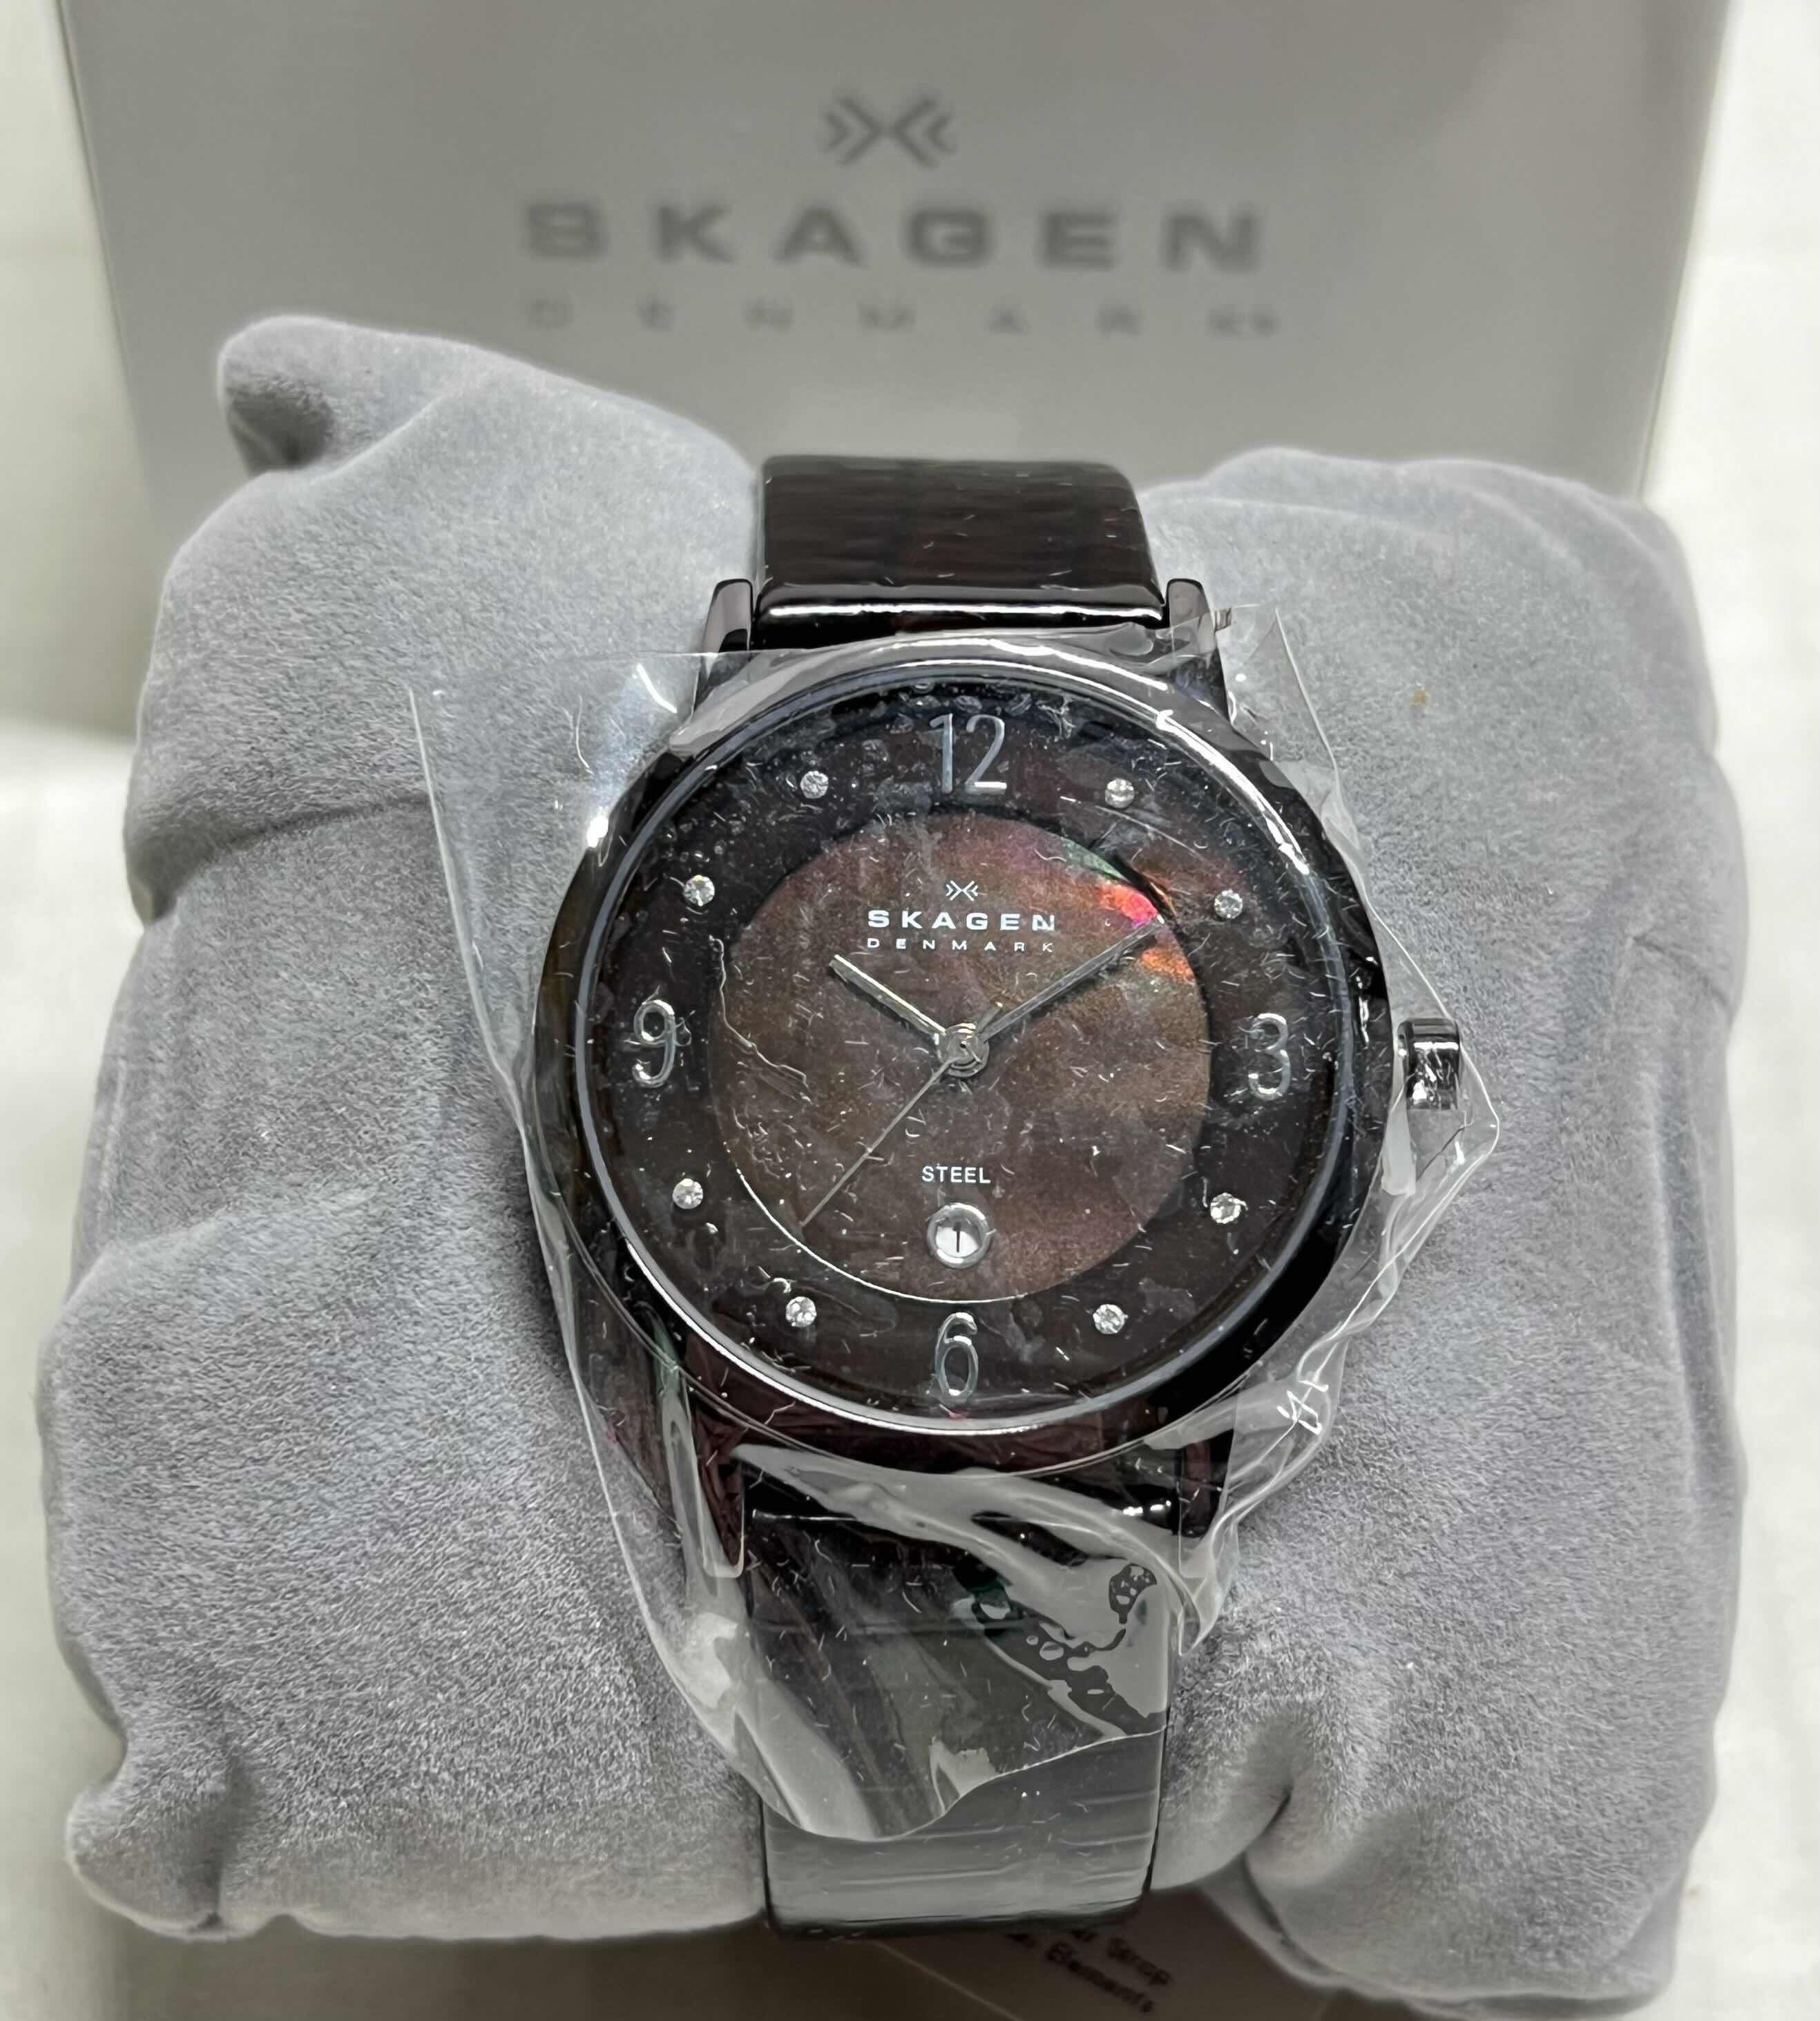 Photo 1 of SKAGEN STEEL WOMENS ANALOG WATCH W STAINLESS STEEL CASE & GENUINE LEATHER STRAP PURPLE MOTHER OF PEARL INLAY W SWAROVSKI CRYSTALS MODEL 574SDLD8A